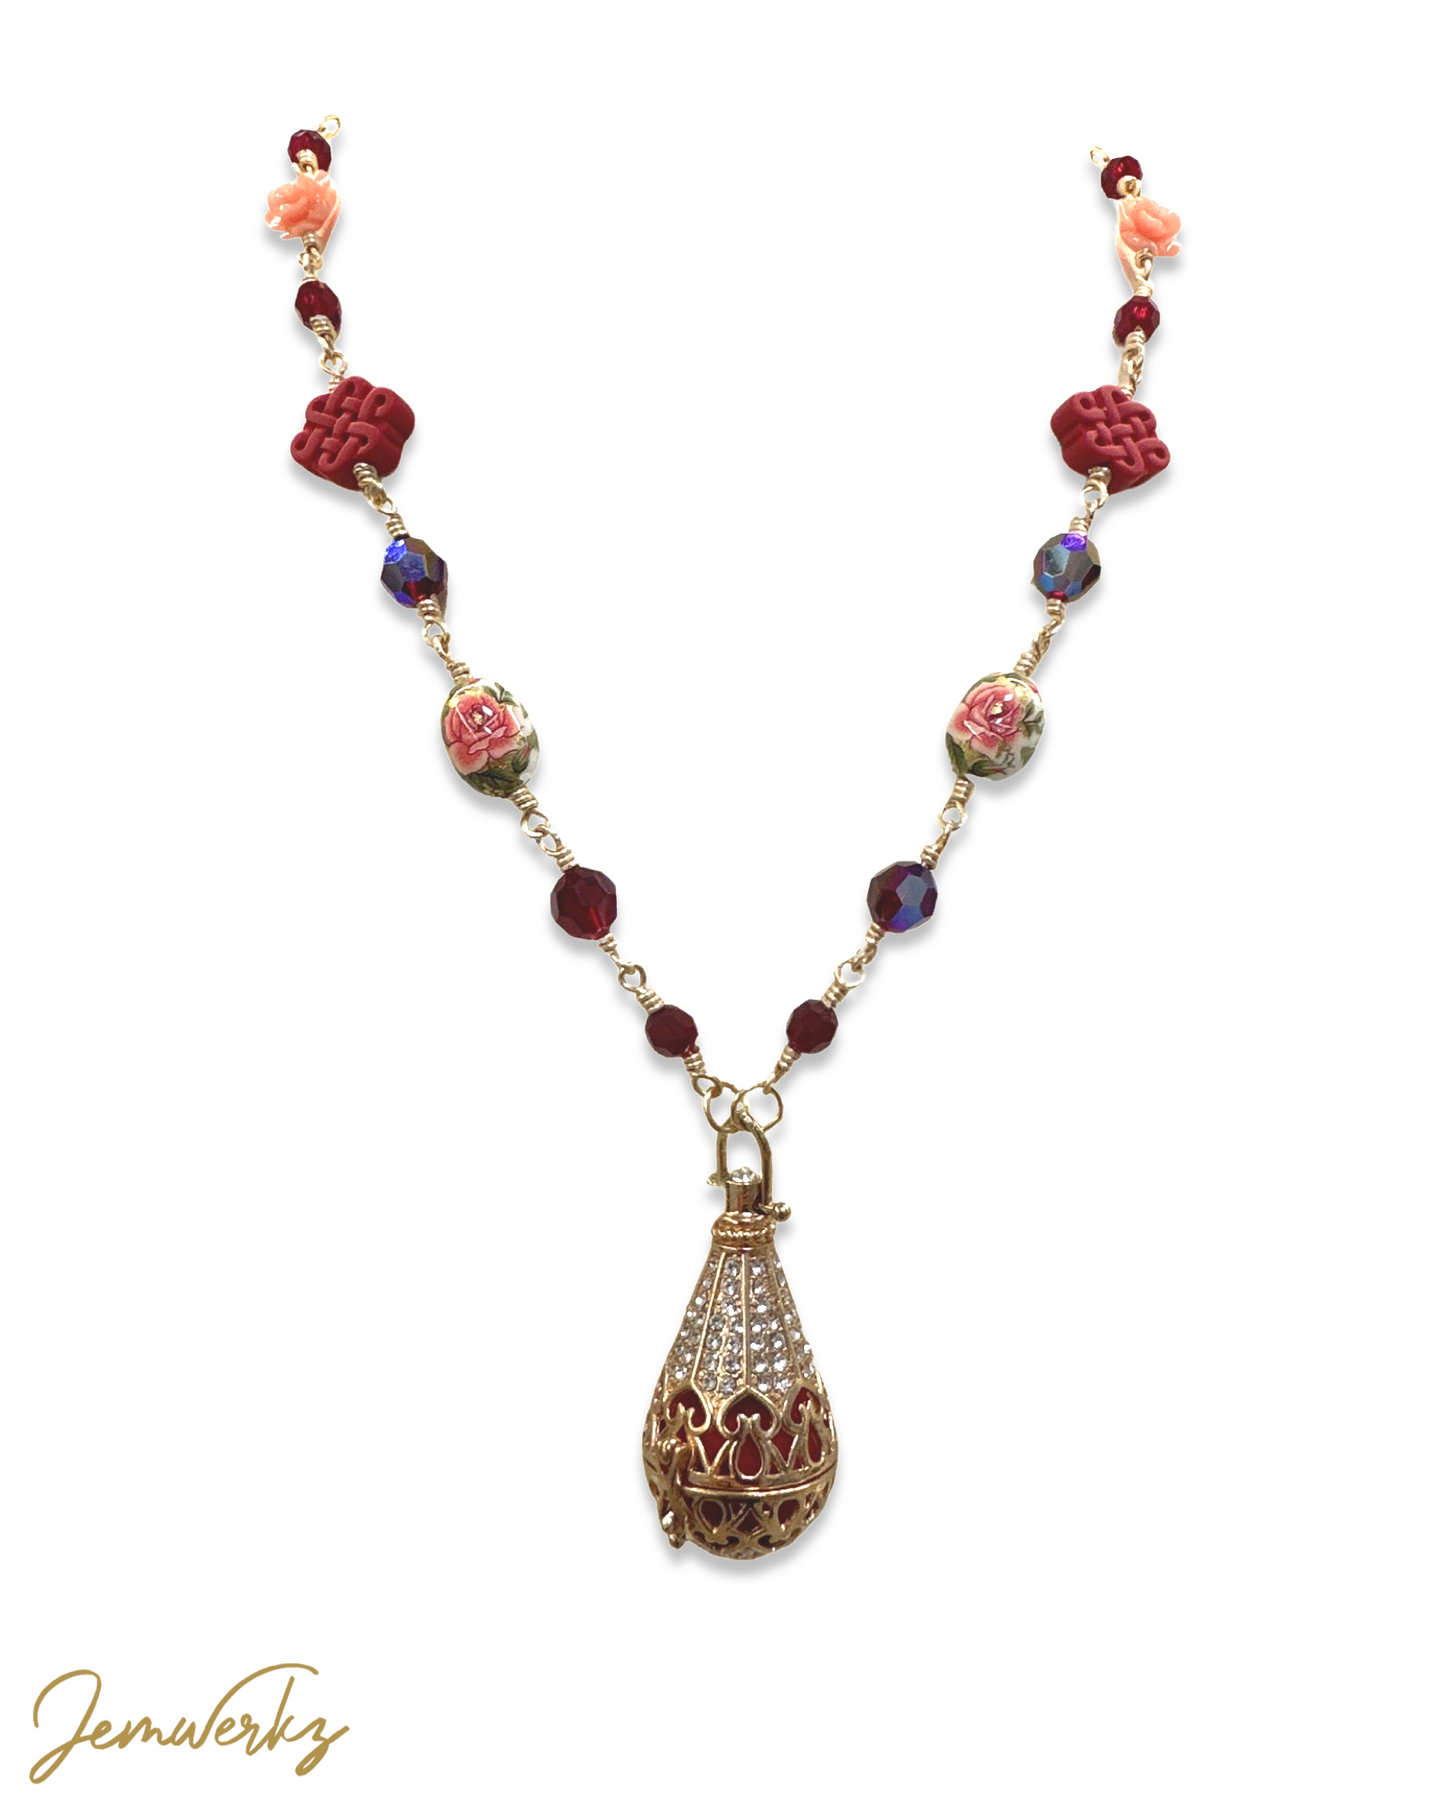 SAMIKO - Red Swarovski Crystal Necklace with Japan Floral Beads, Chinese Knot, Rose and Aroma Cage